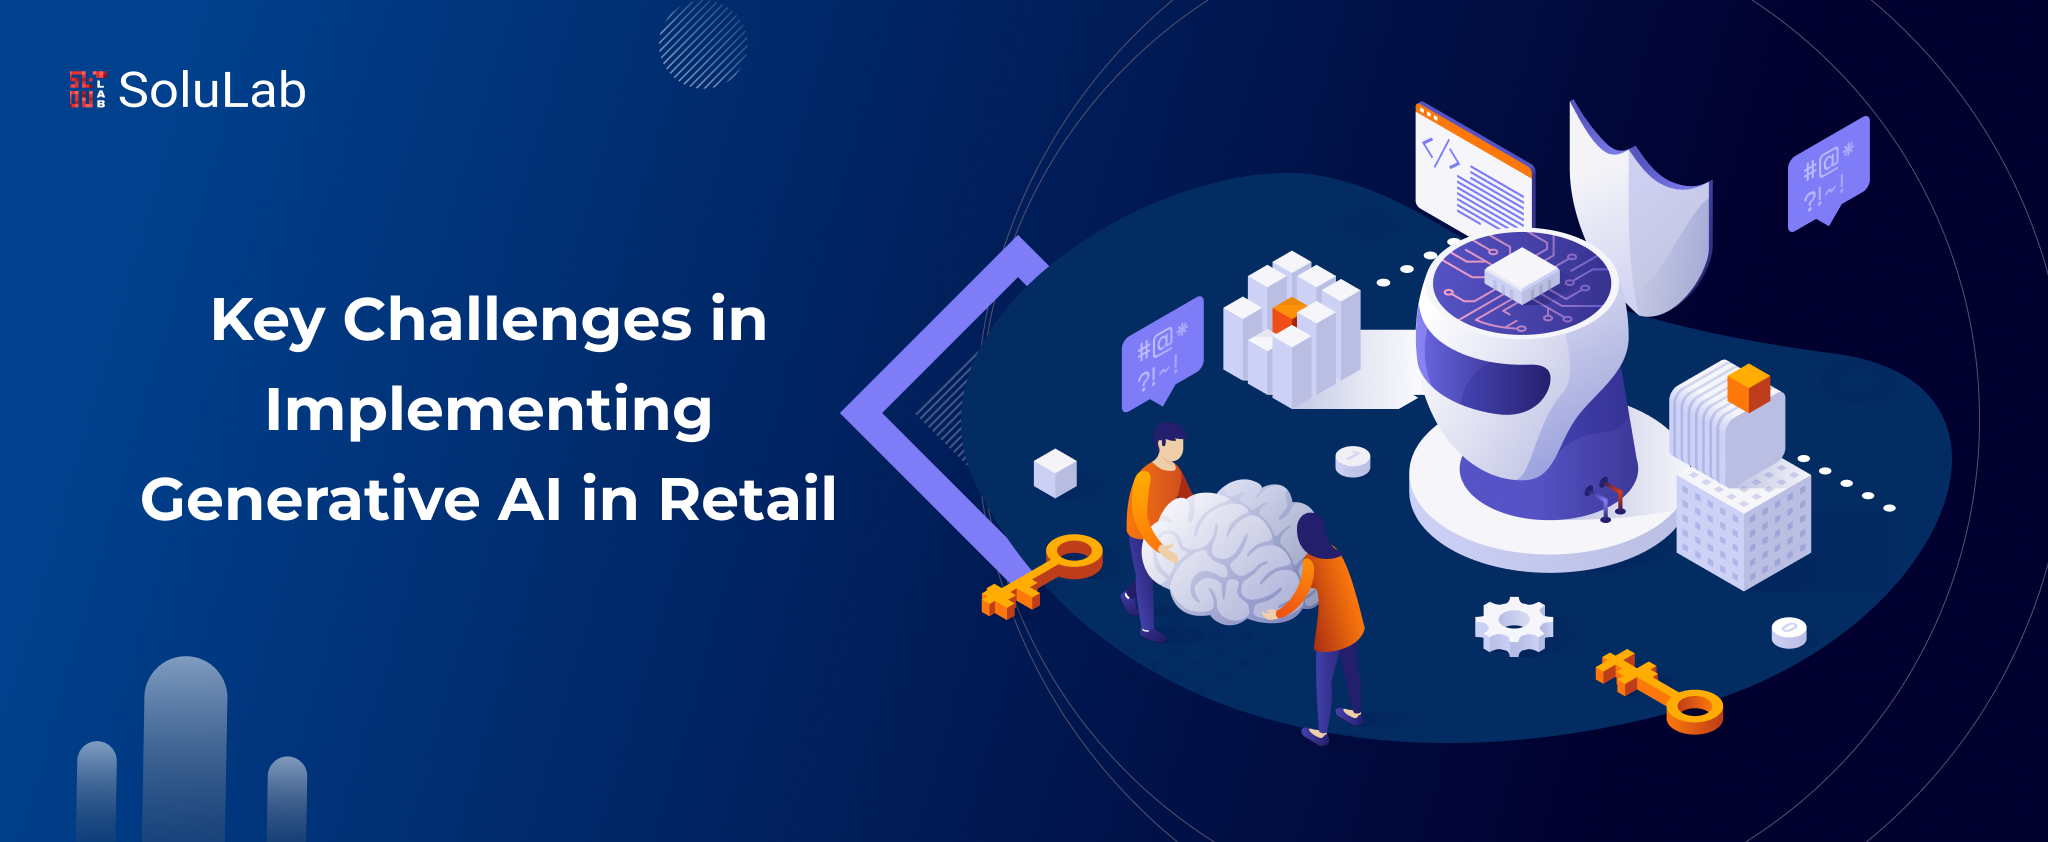 Key Challenges in Implementing Generative AI in Retail